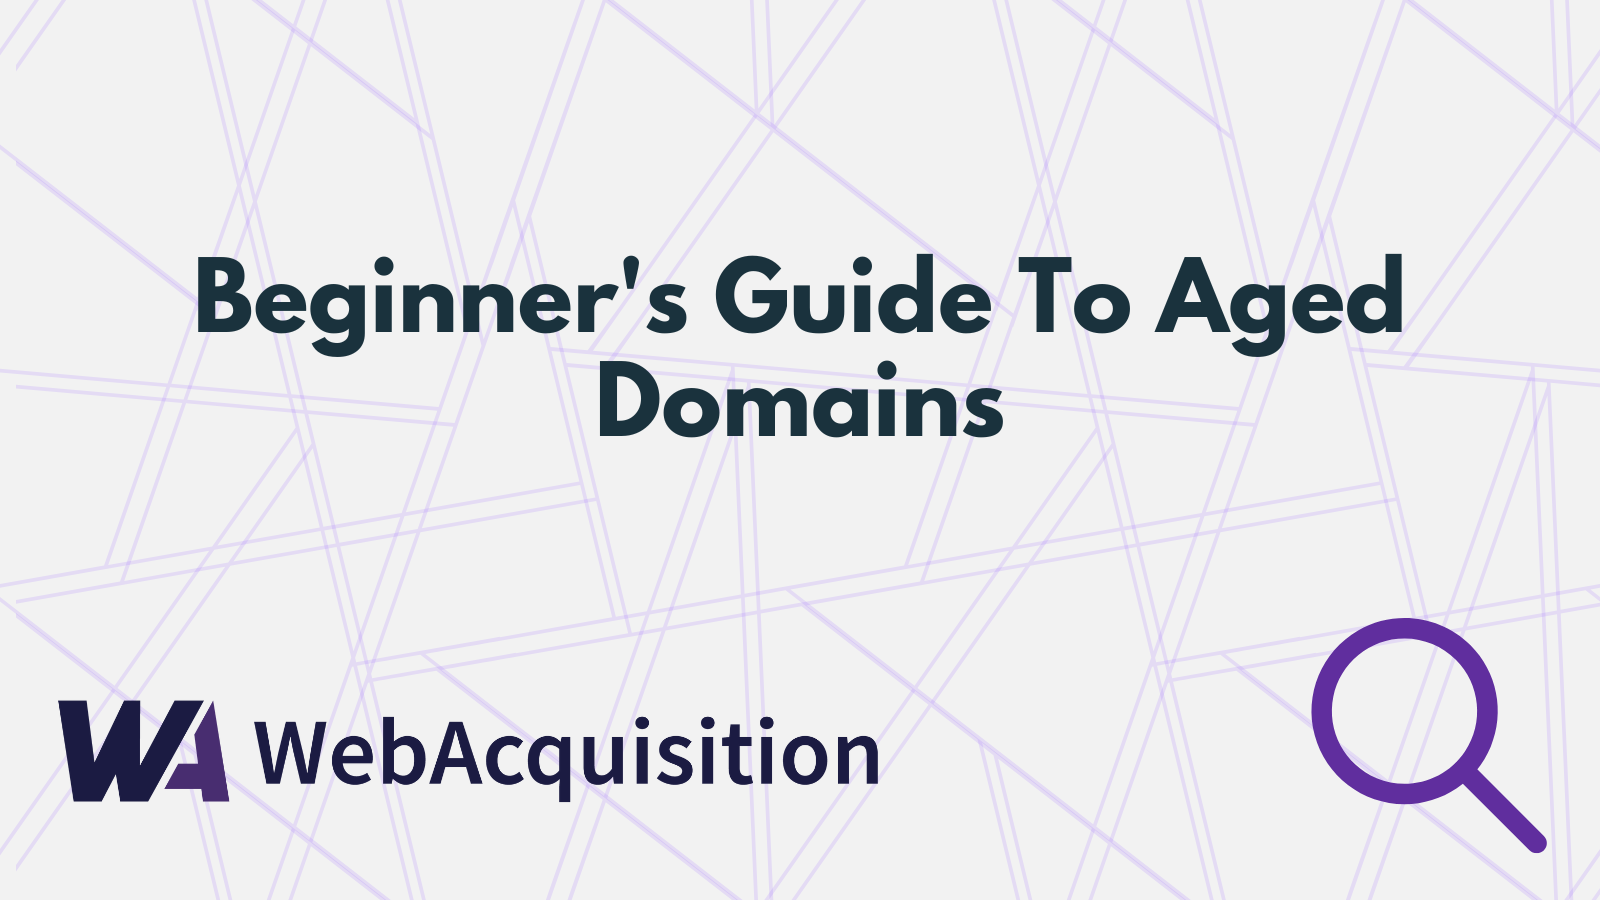 Beginner's Guide To Aged Domains